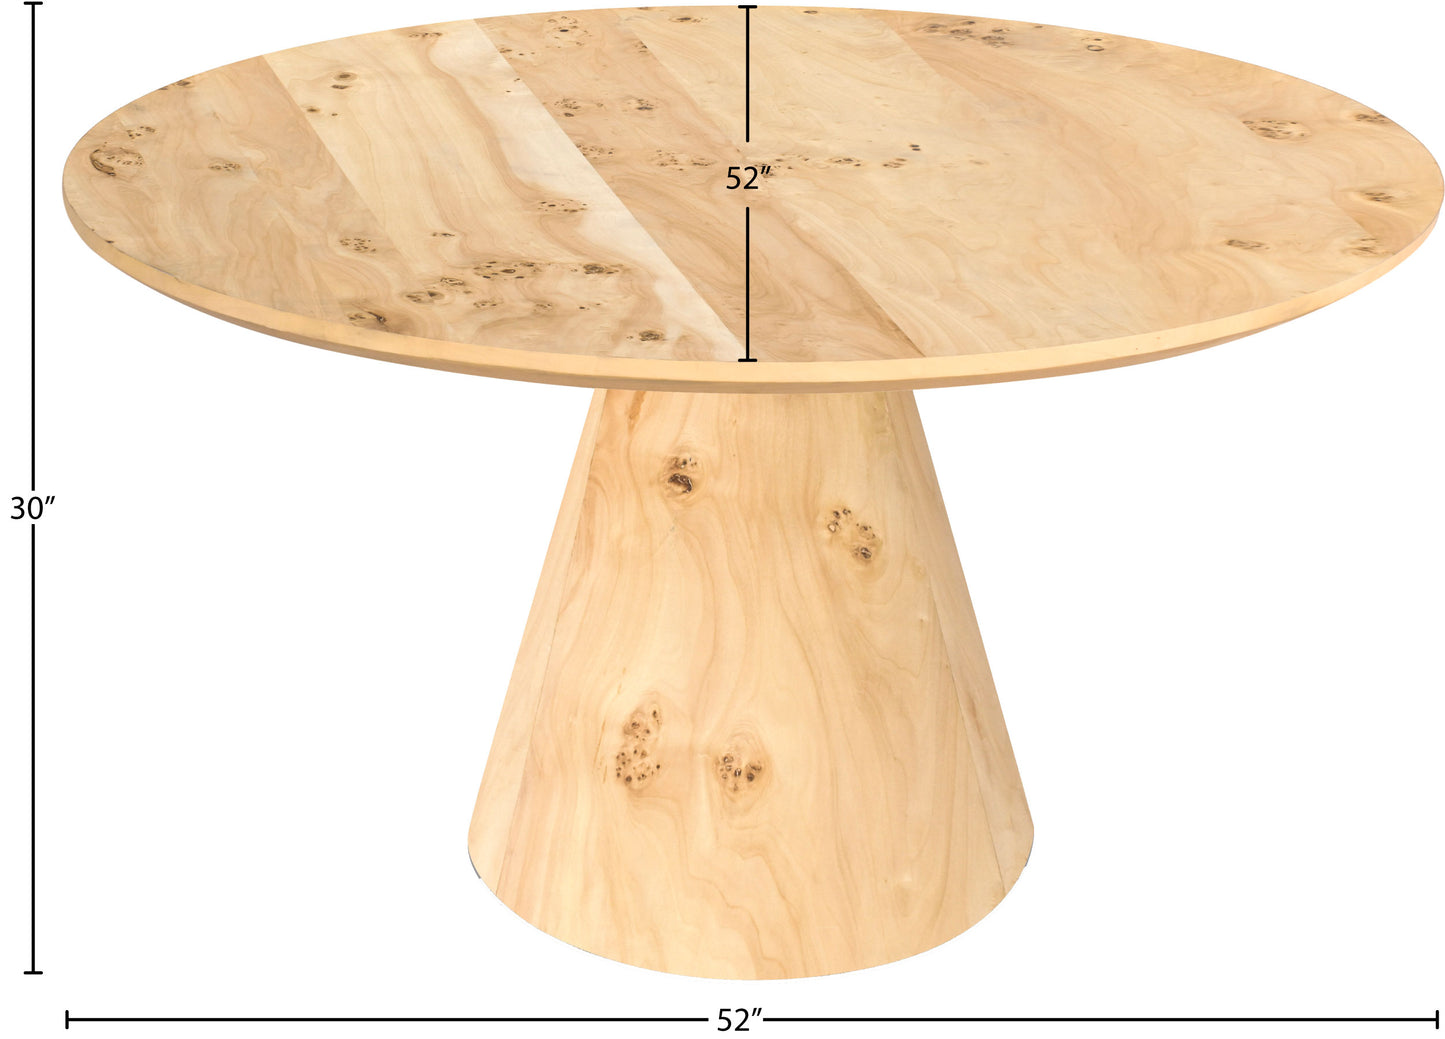 glassimo burl wood dining table t